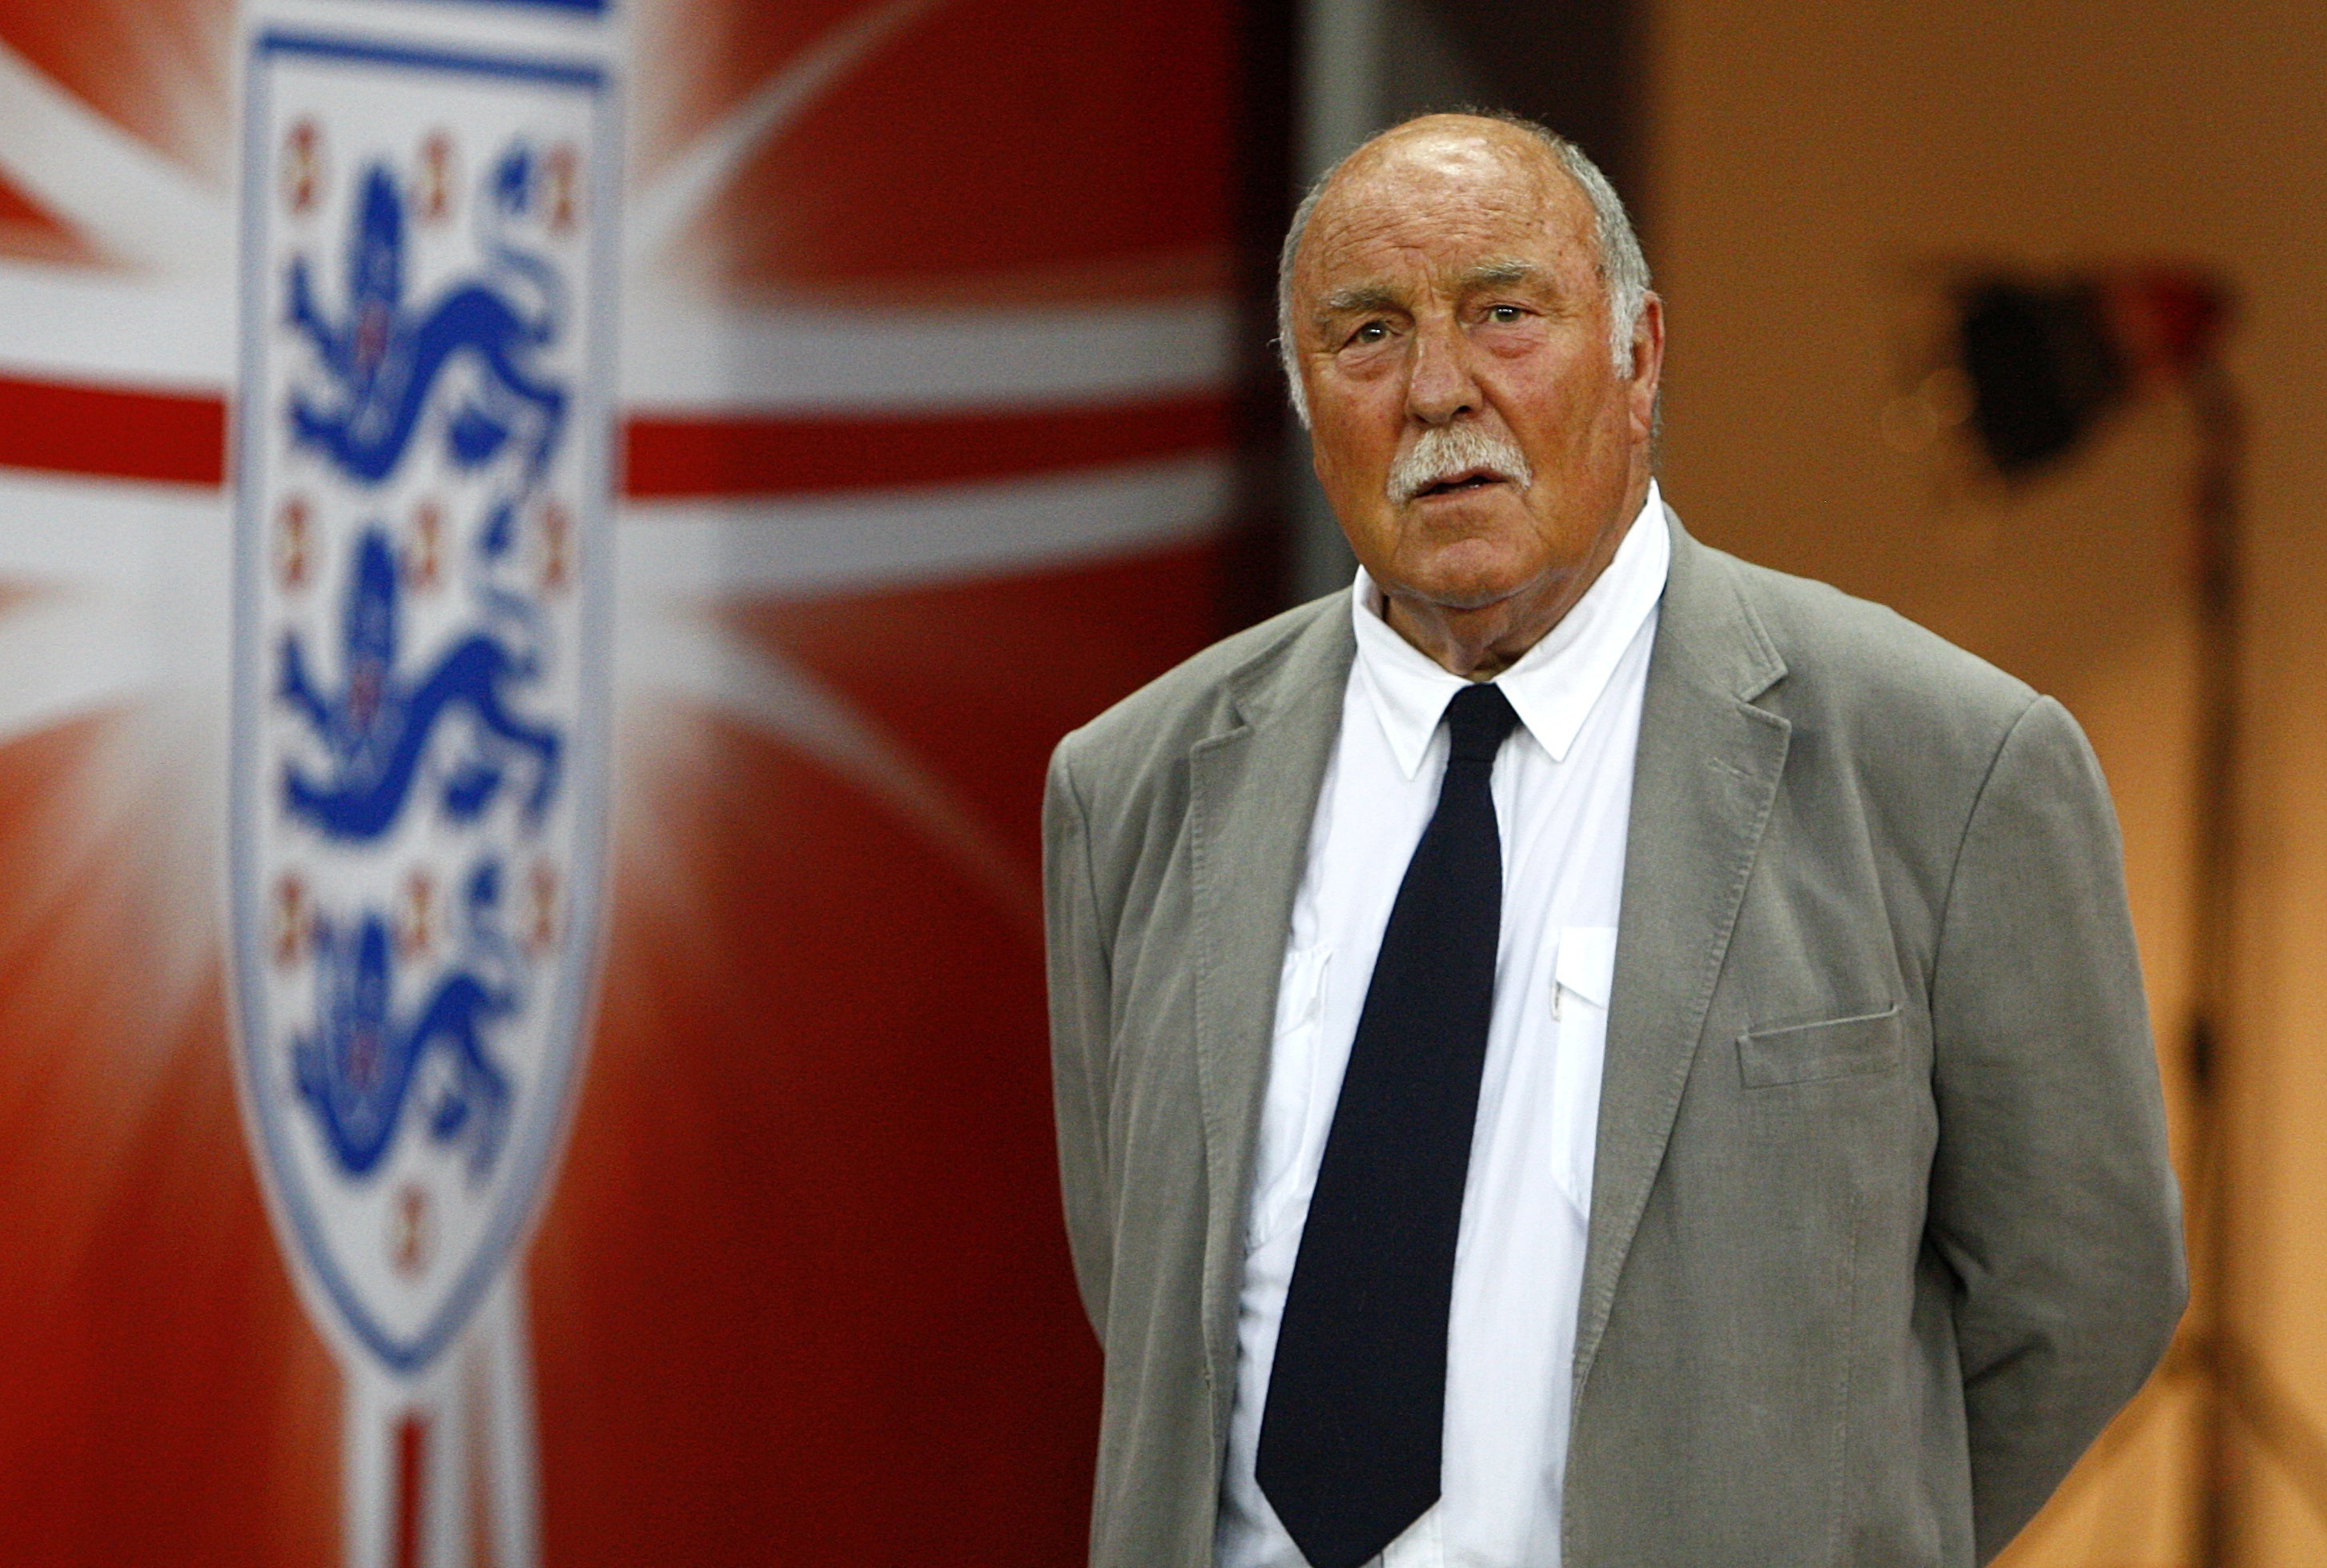 Jimmy Greaves, pictured here in 2009, scored 44 goals in 57 matches for England and was part of the 1966 World Cup-winning squad, though he controversially missed out on the final